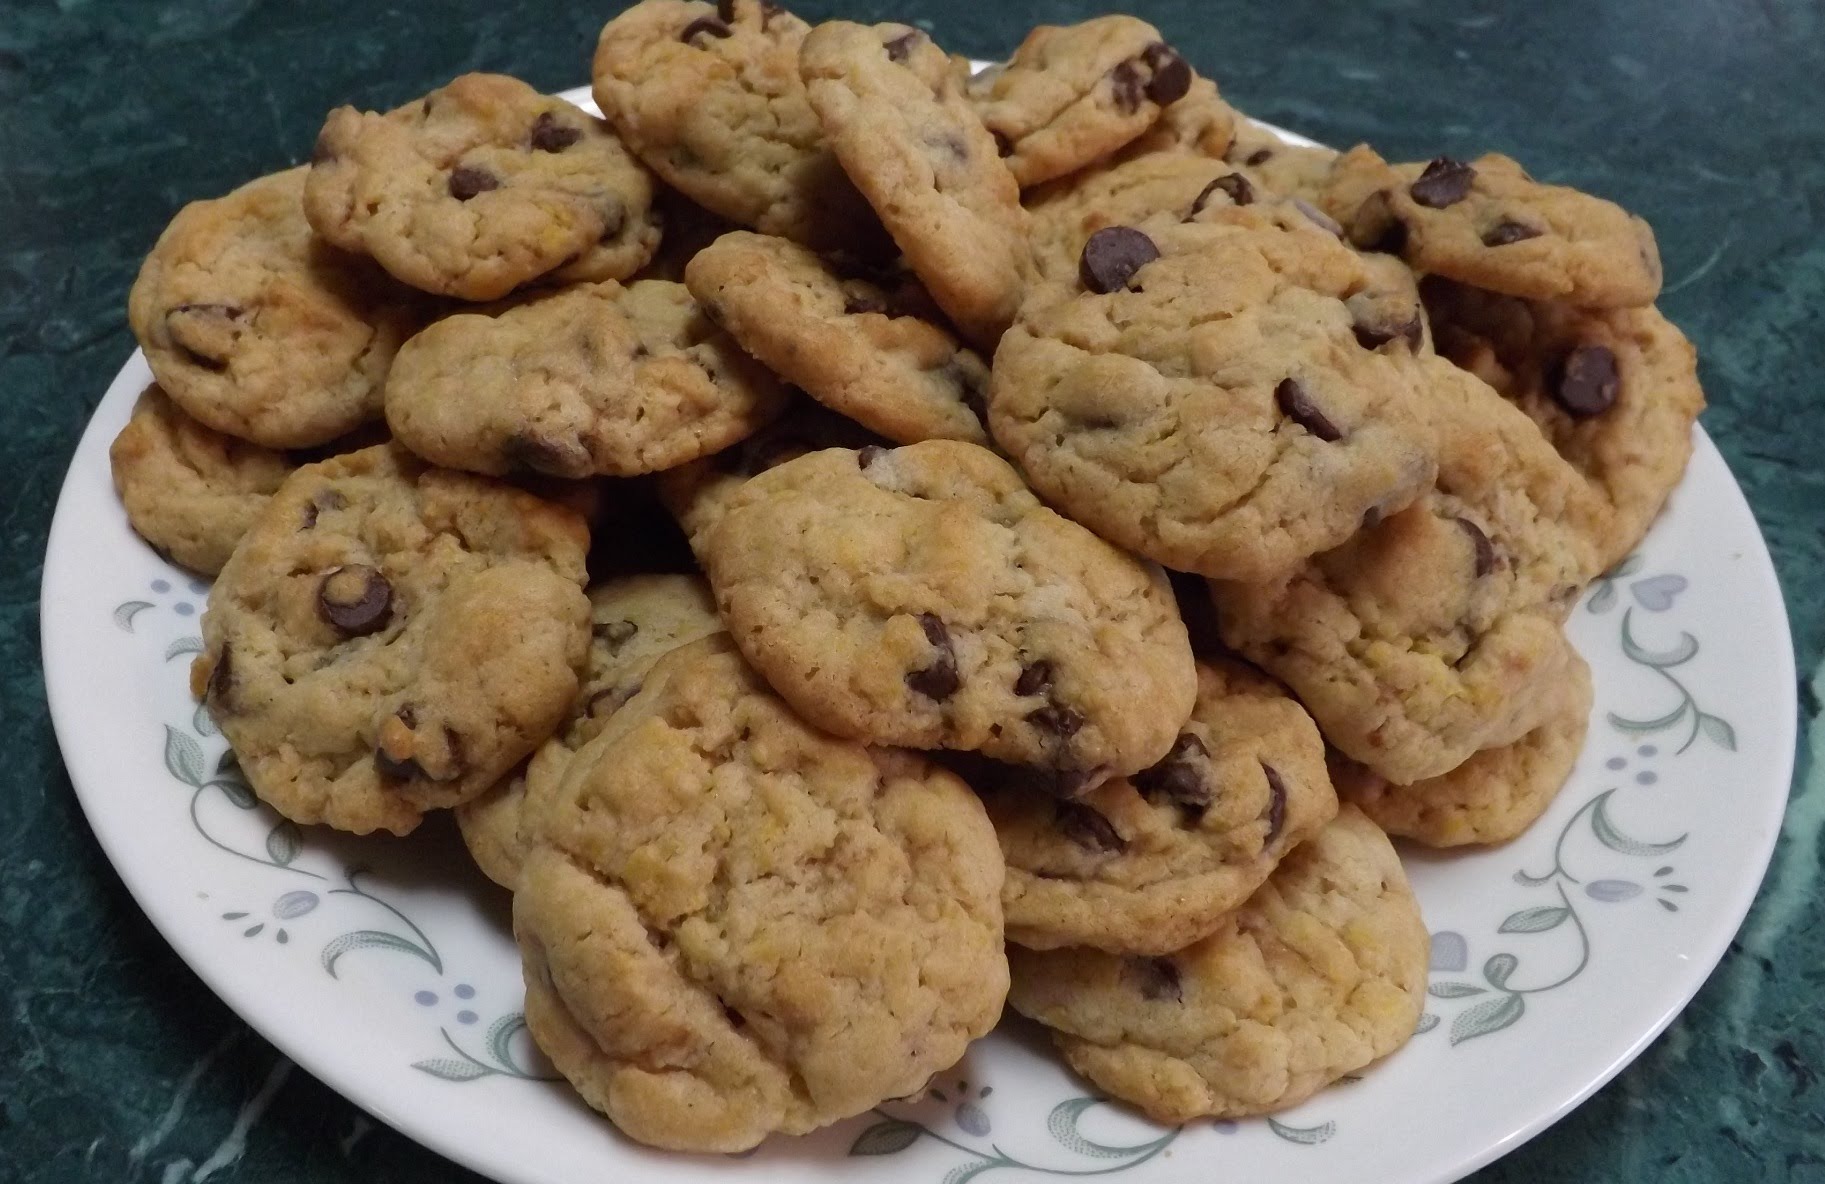 How to Make Chocolate Chip Cookies from Homemade Cookie Mix - YouTube